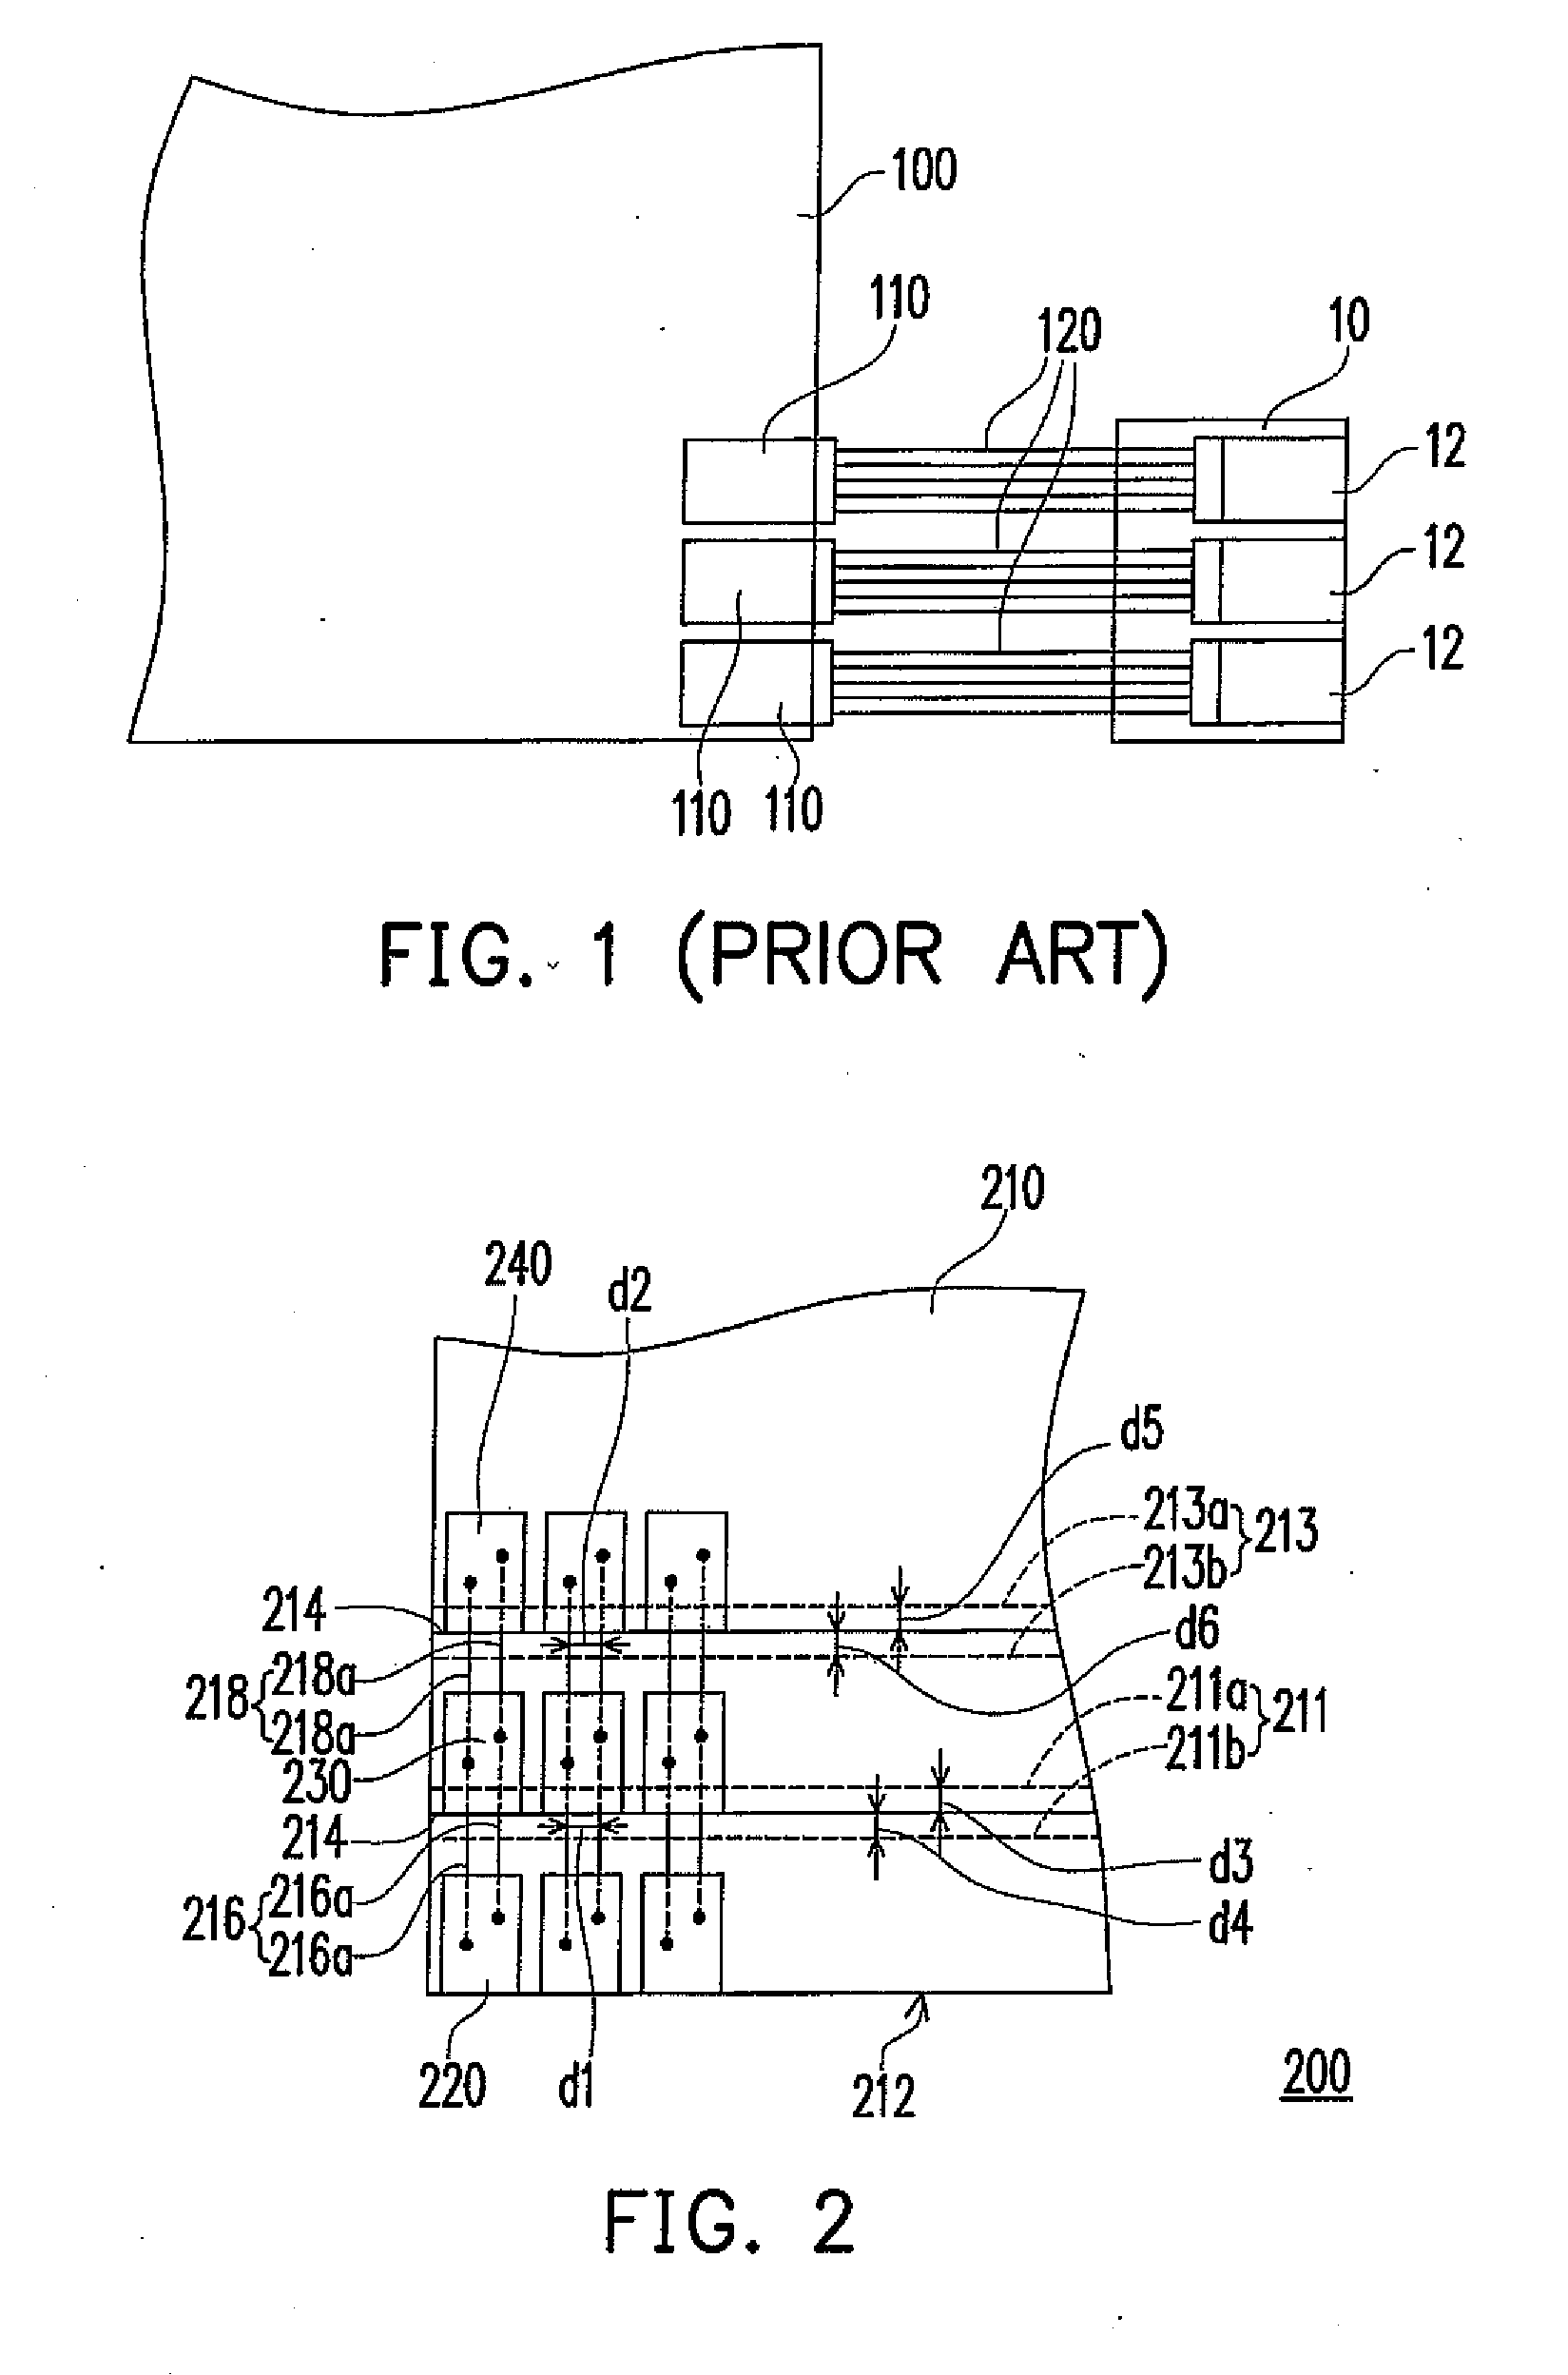 Circuit board having at least one auxiliary scribed line